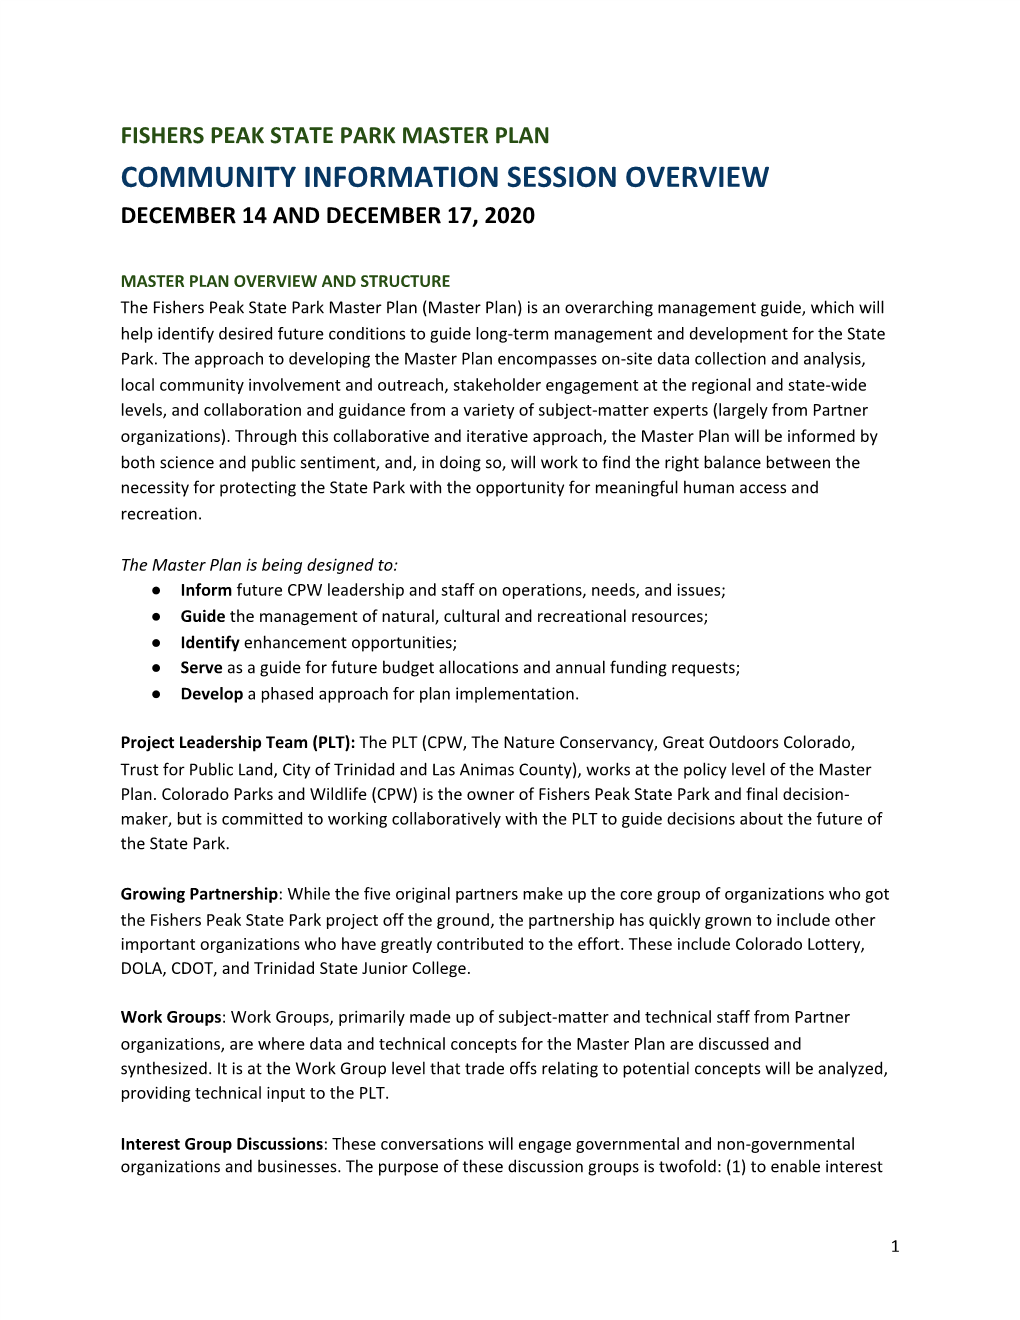 Community Information Session Overview December 14 and December 17, 2020